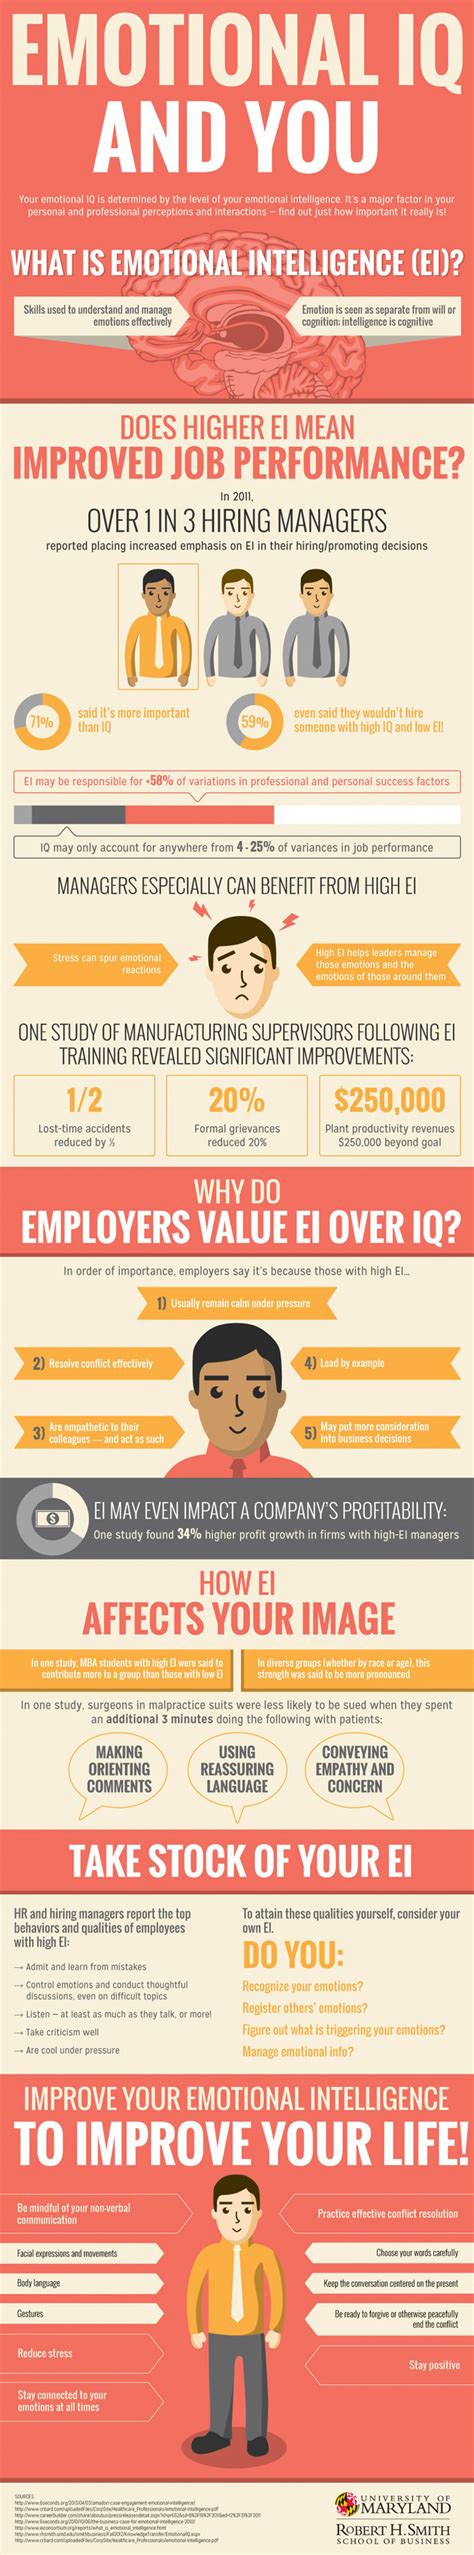 Emotional IQ and You Infographic | Emotional intelligence, What is emotional intelligence ...